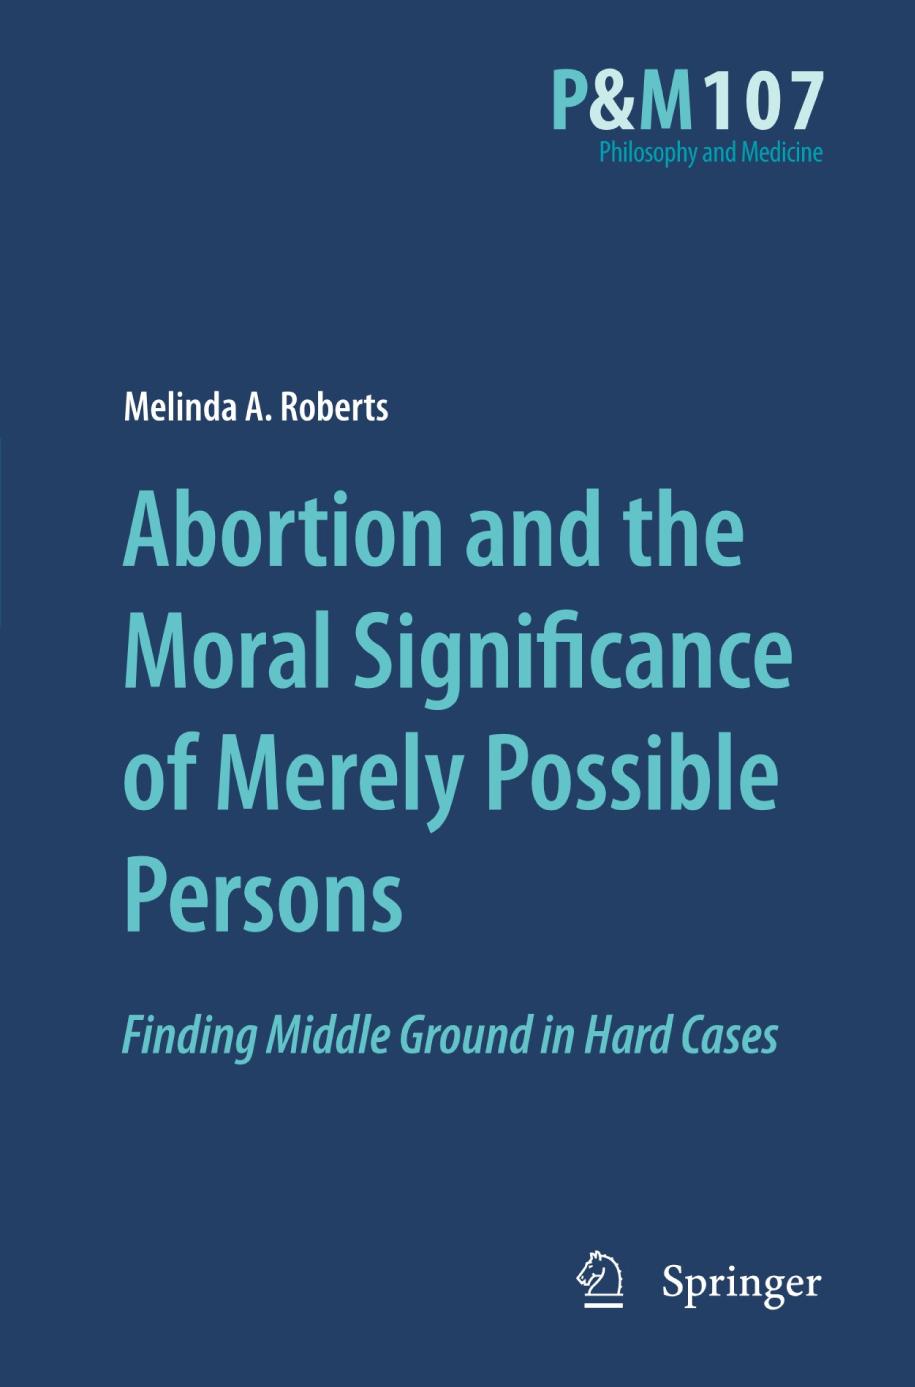 Abortion and the Moral Significance of Merely Possible Persons